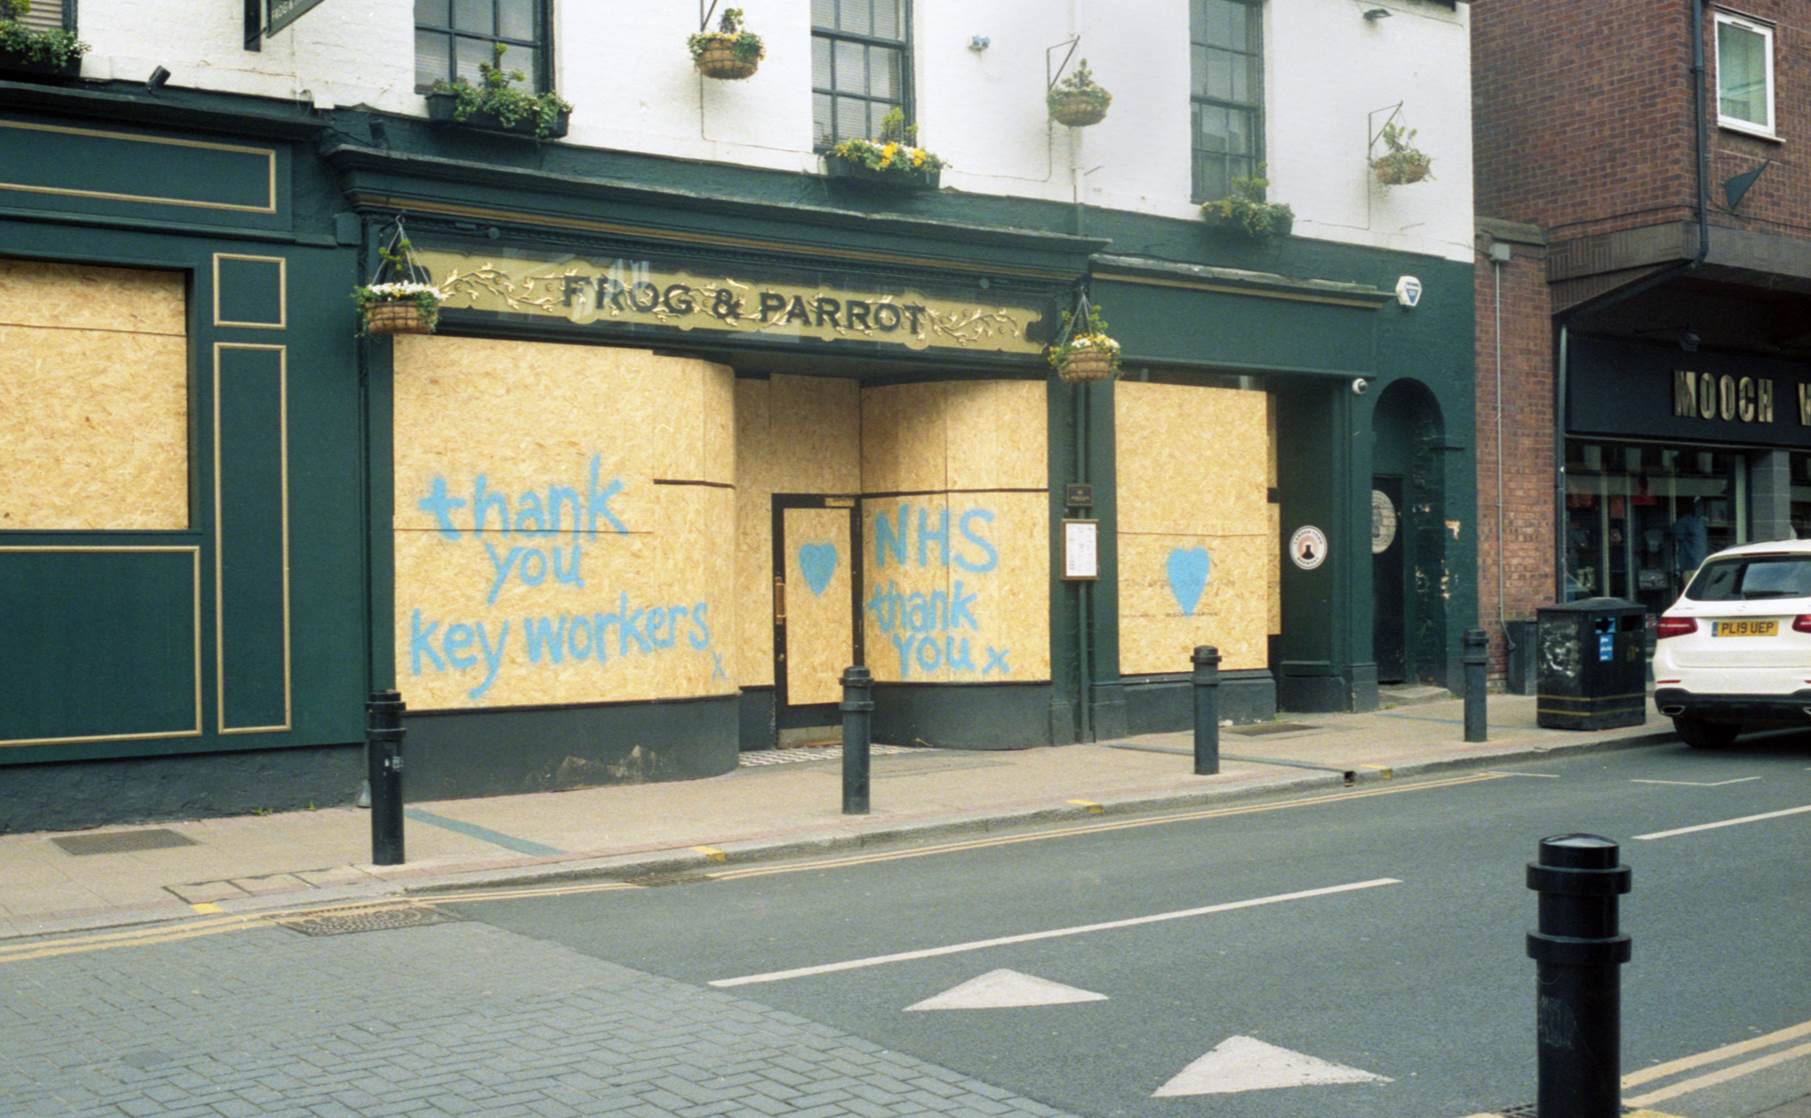 boarded up Frog & Parrot pub with spray painted messages of support for NHS and keyworkers